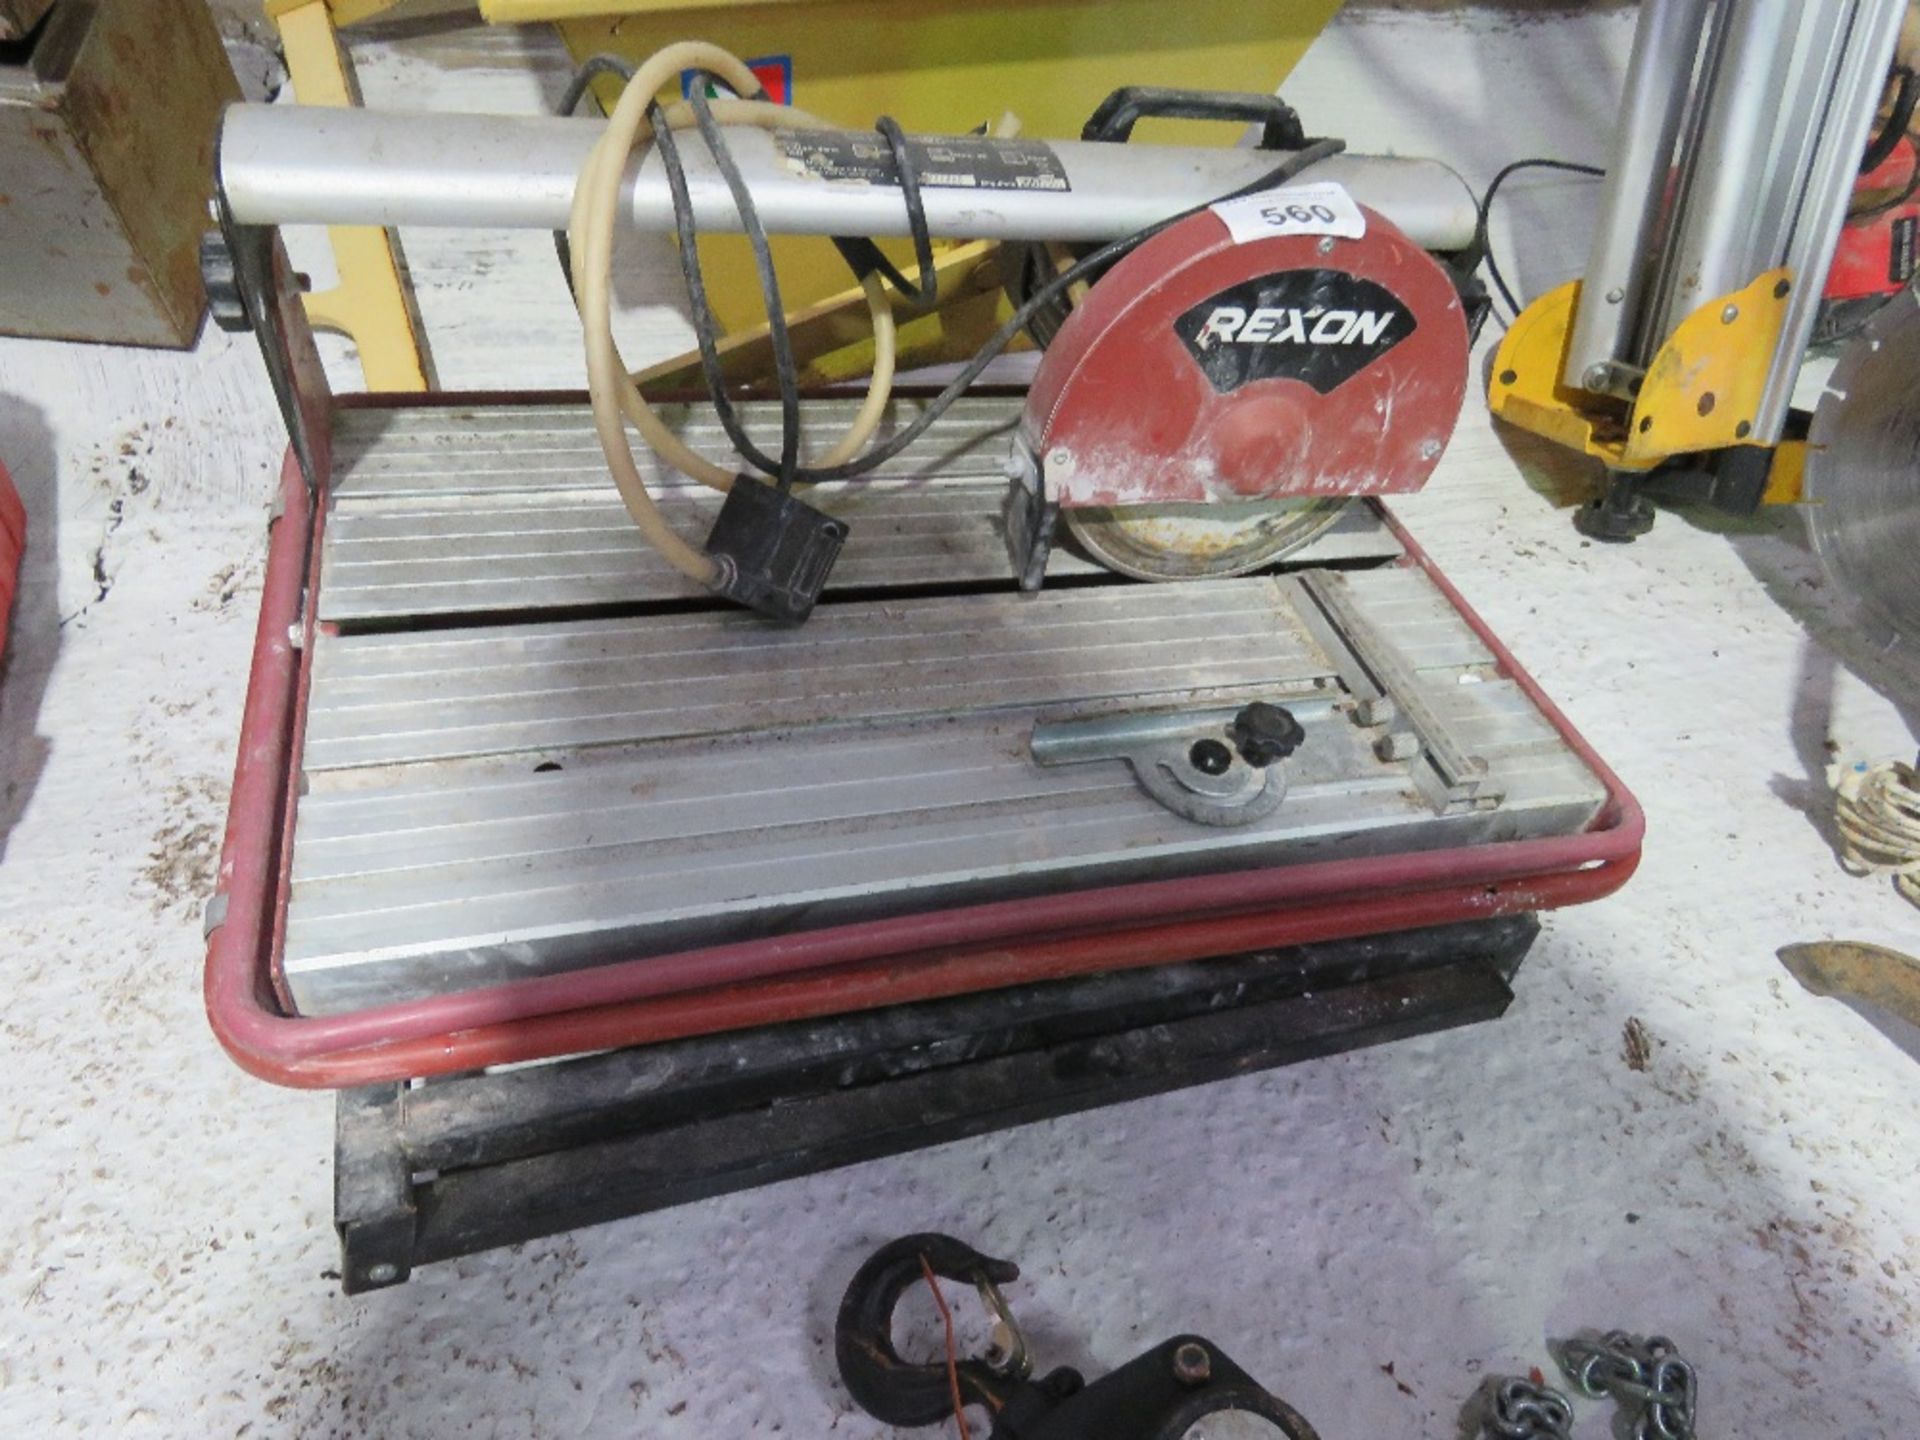 REXON SLIDING HEAD TILE SAW ON LEGS. DIRECT FROM LOCAL RETIRING BUILDER. THIS LOT IS SOLD UNDER